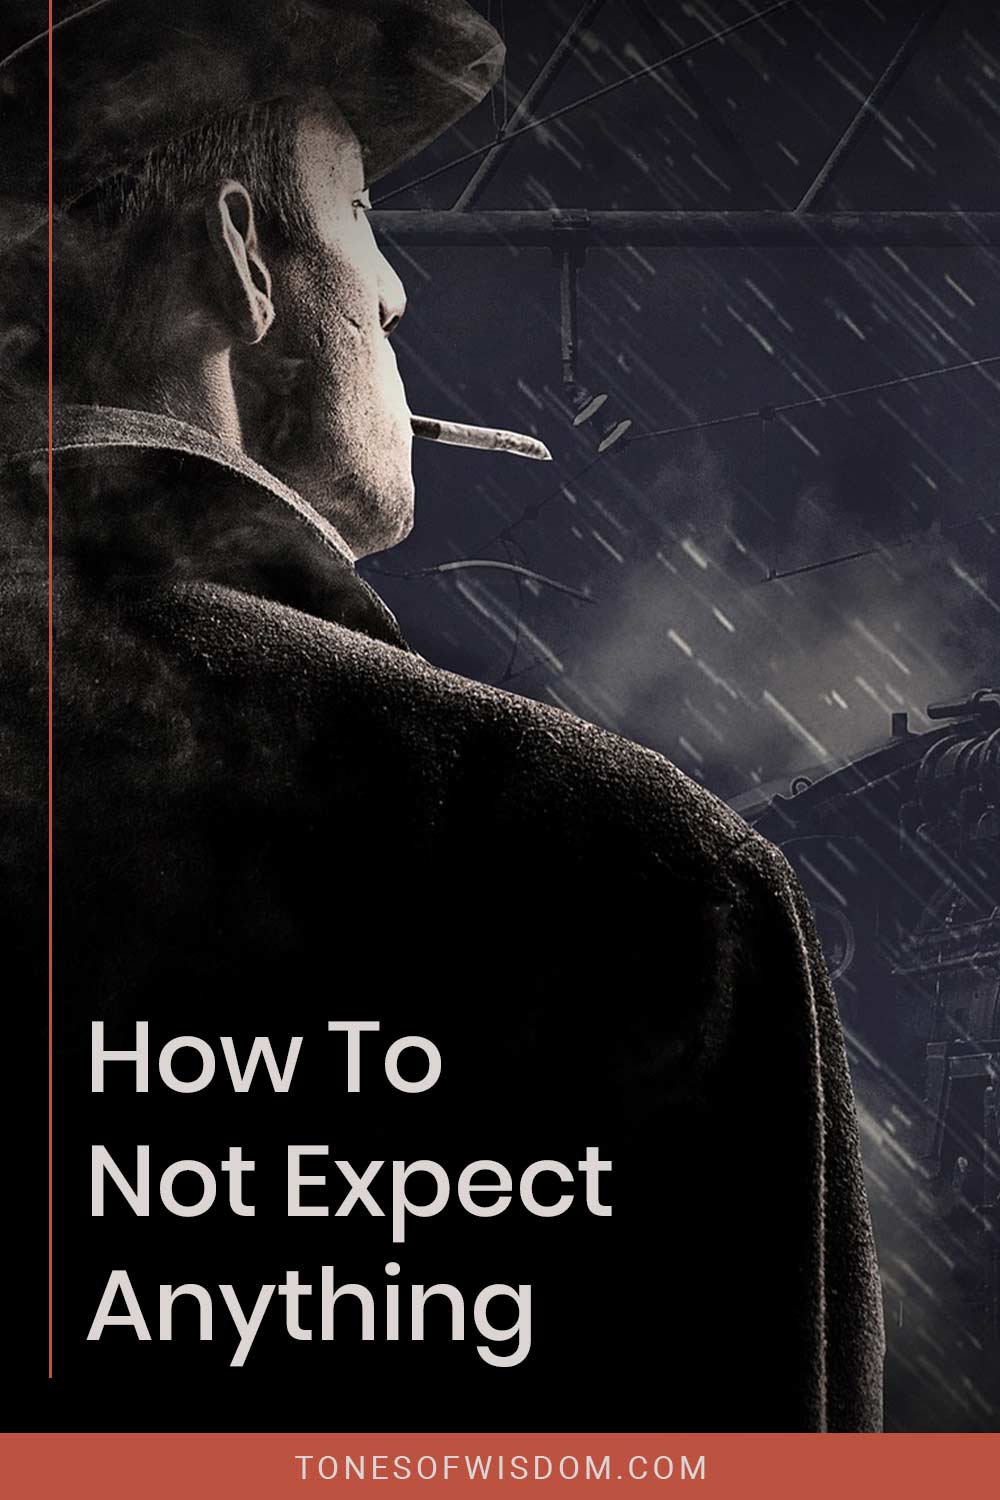 Man wearing a hat with a cigarette in his mouth - How To Not Expect Anything?